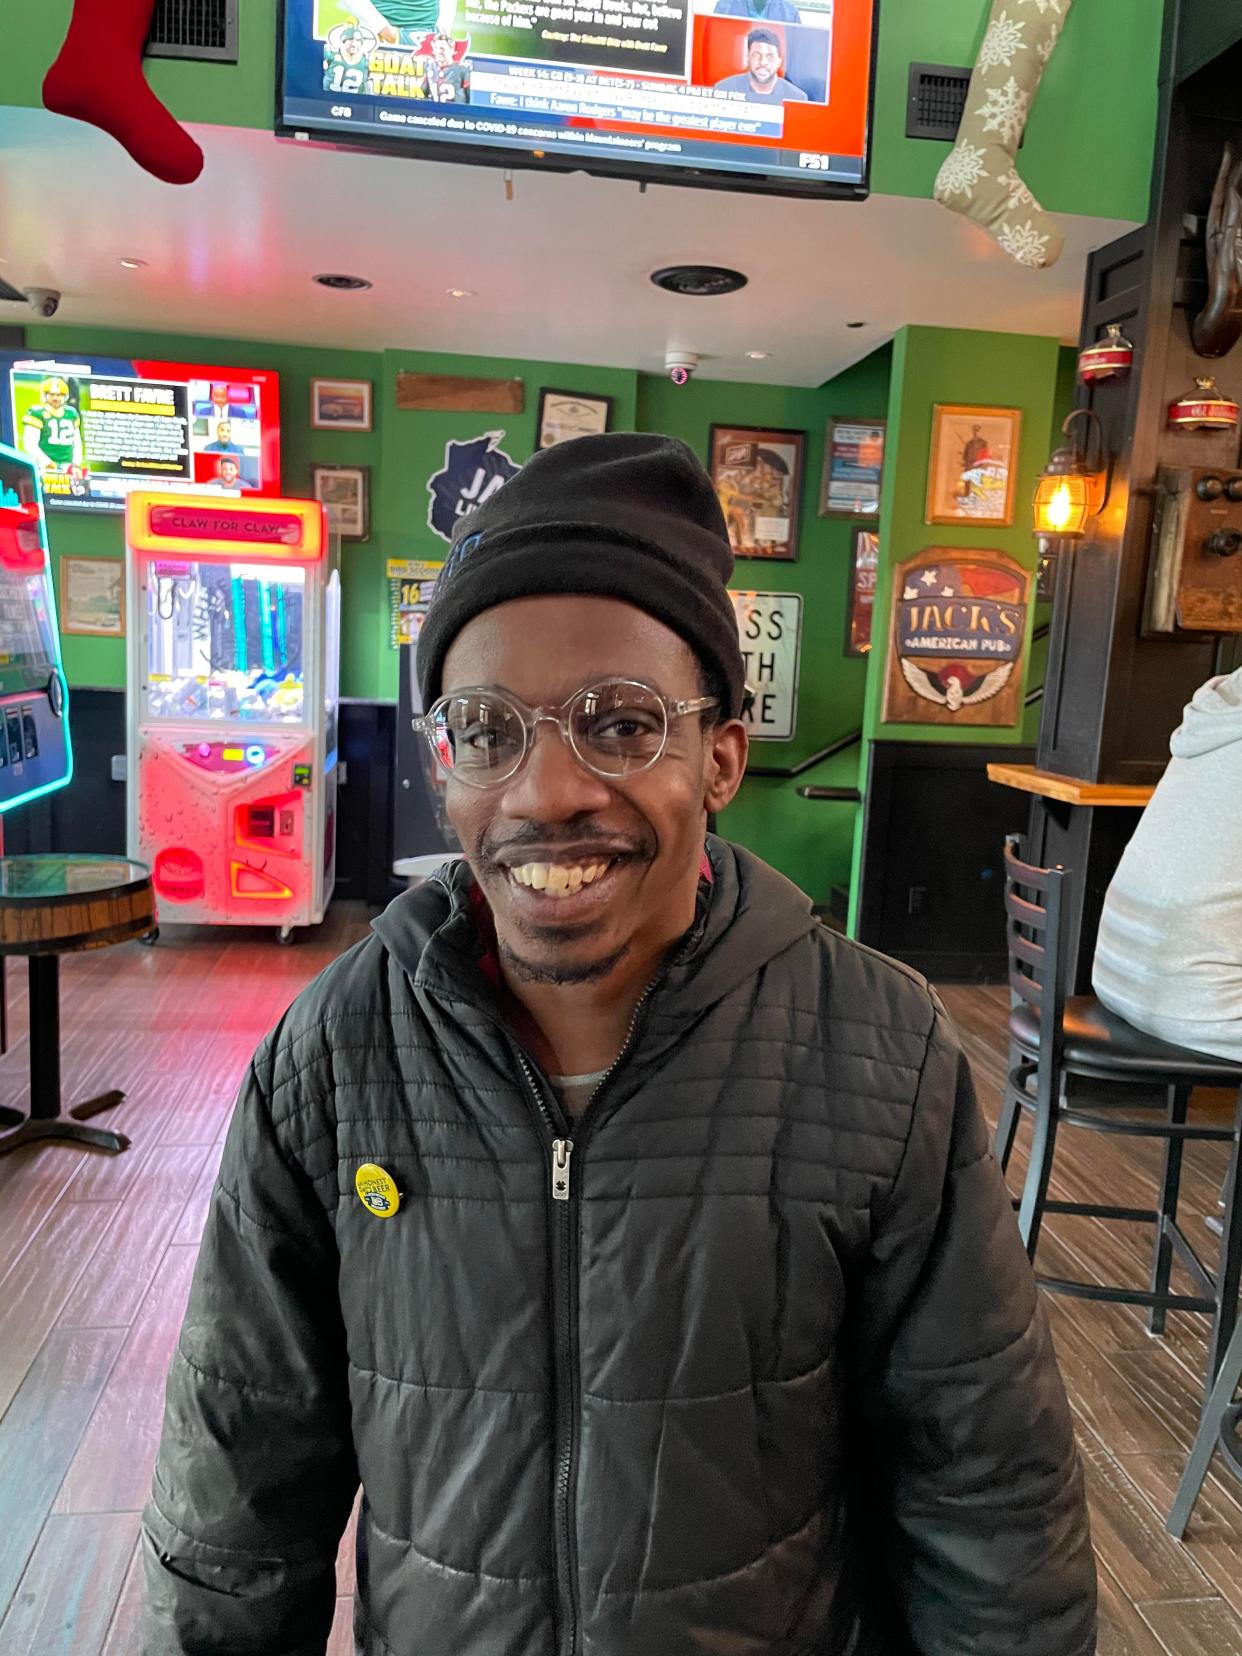 Quincy is a regular at many Brady Street establishments. He was severely injured in a hit-and-run on the street on Memorial Day.